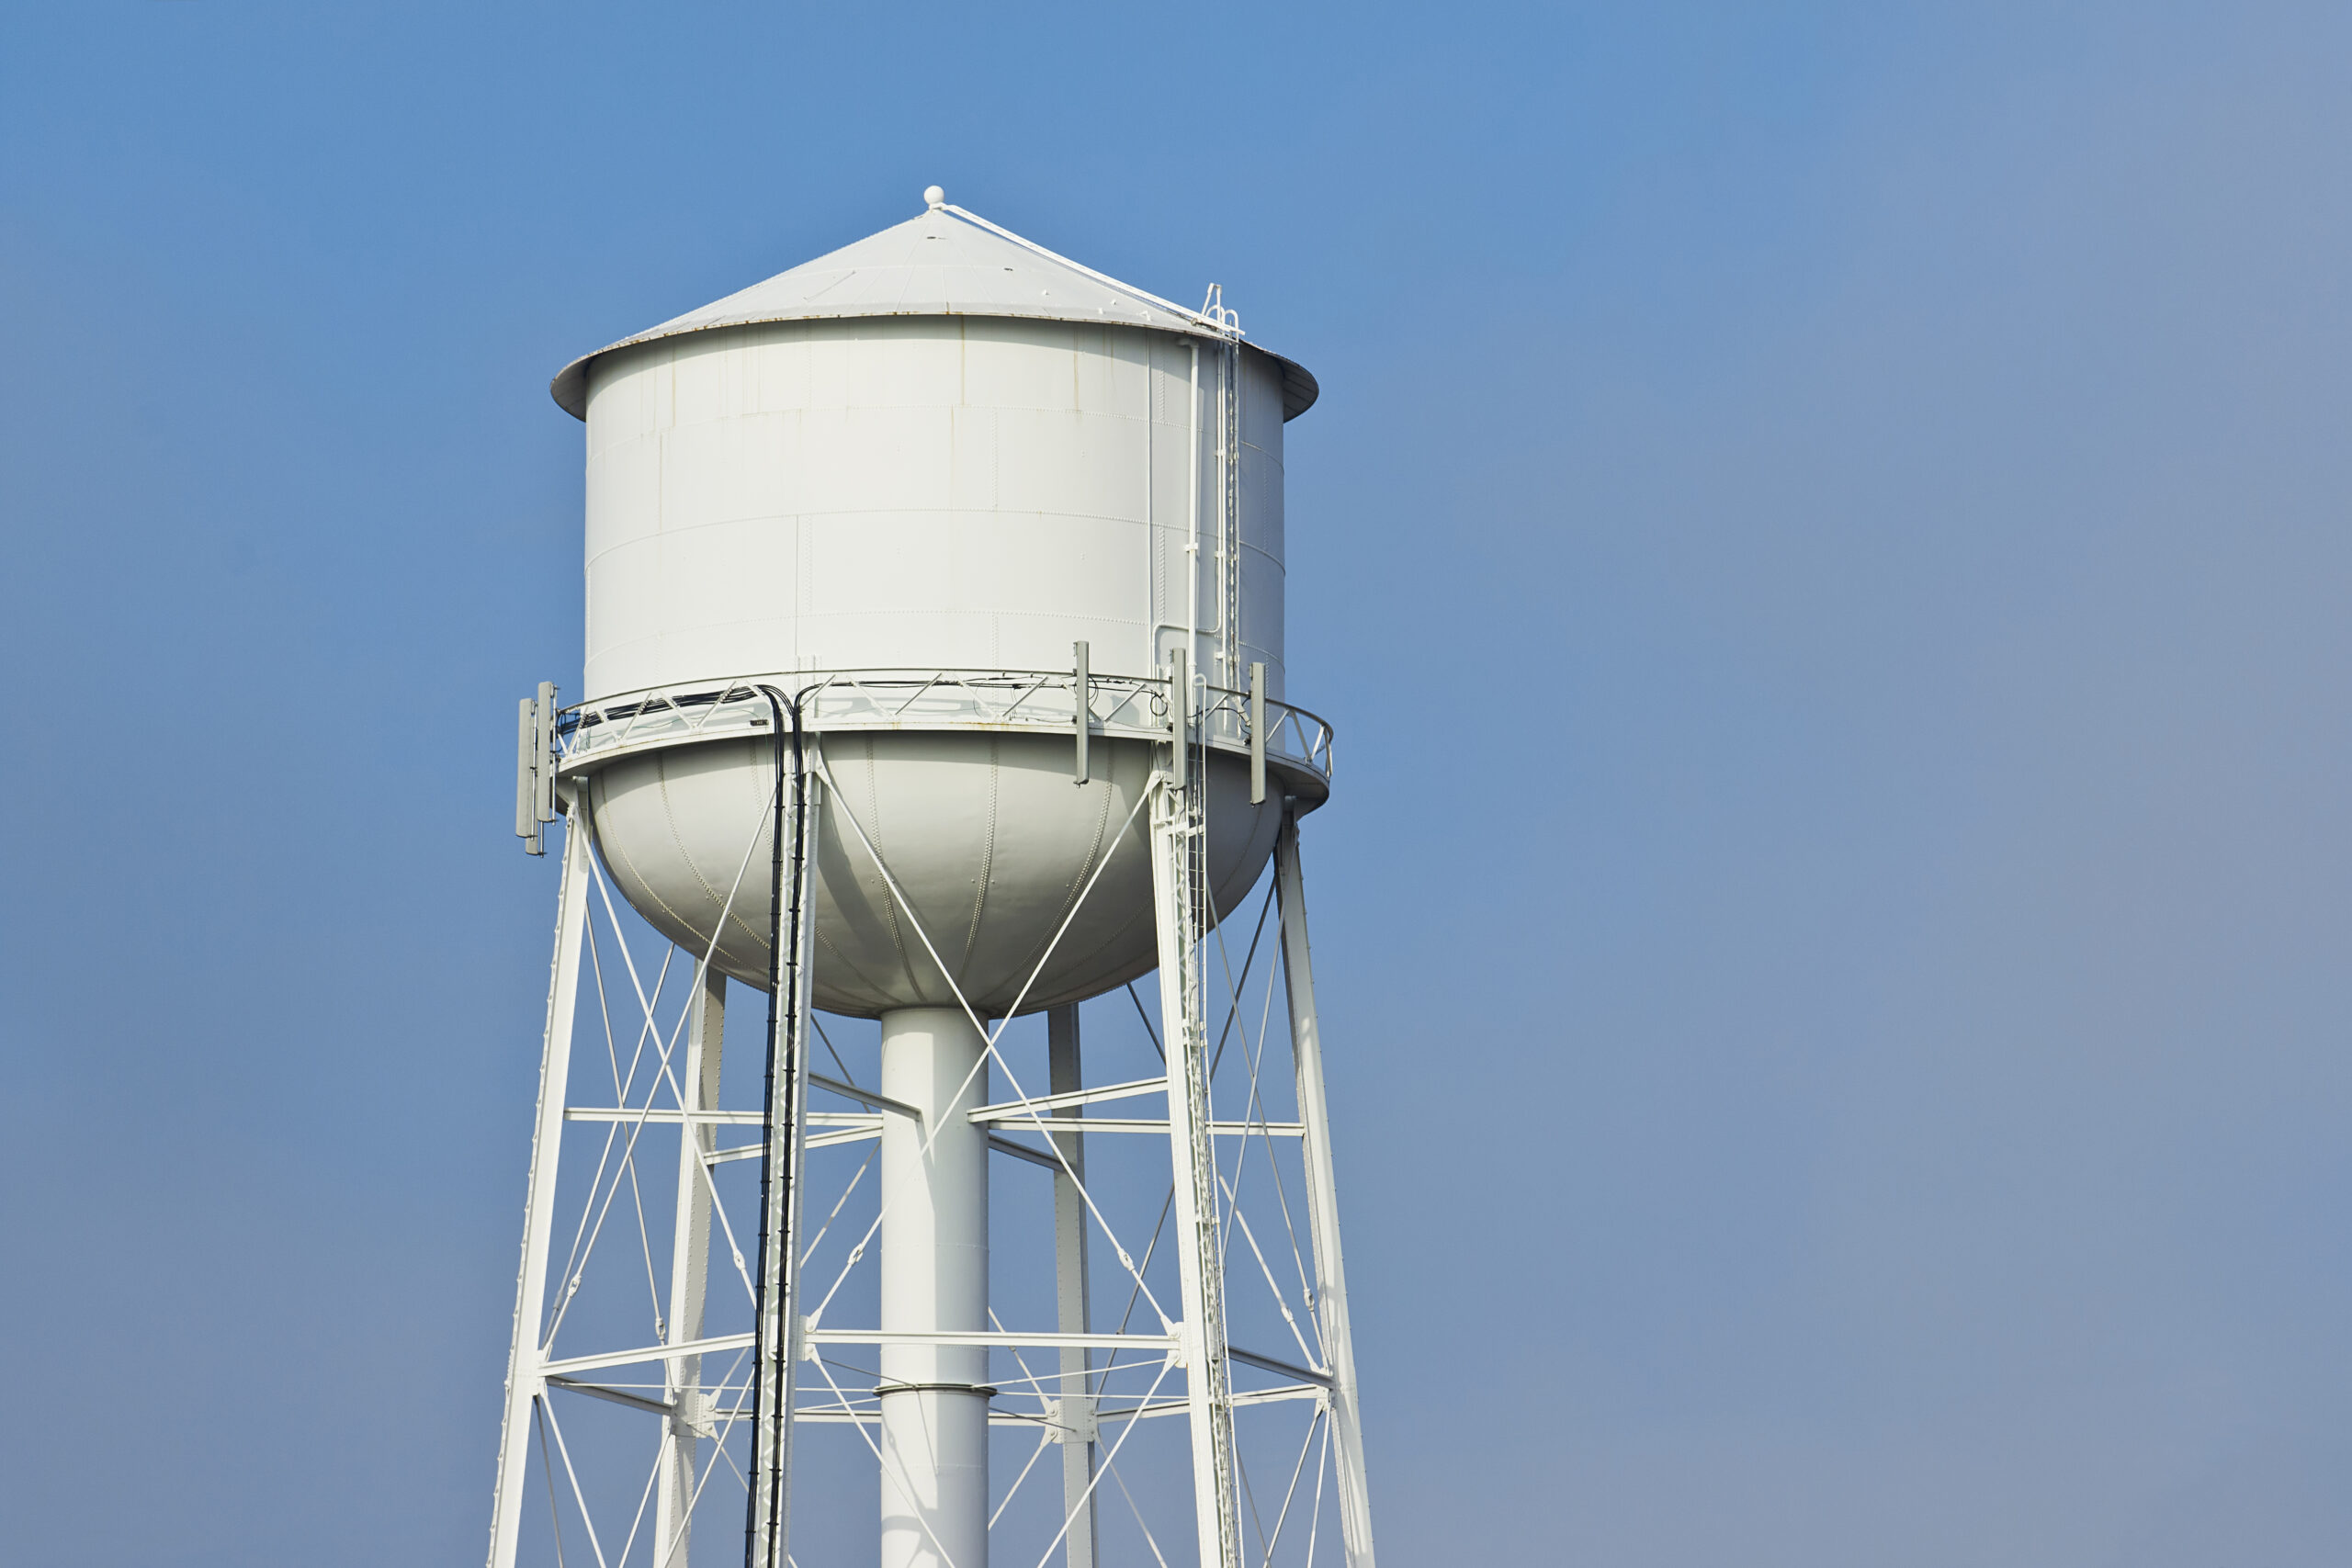 What Does Water Towers Do?